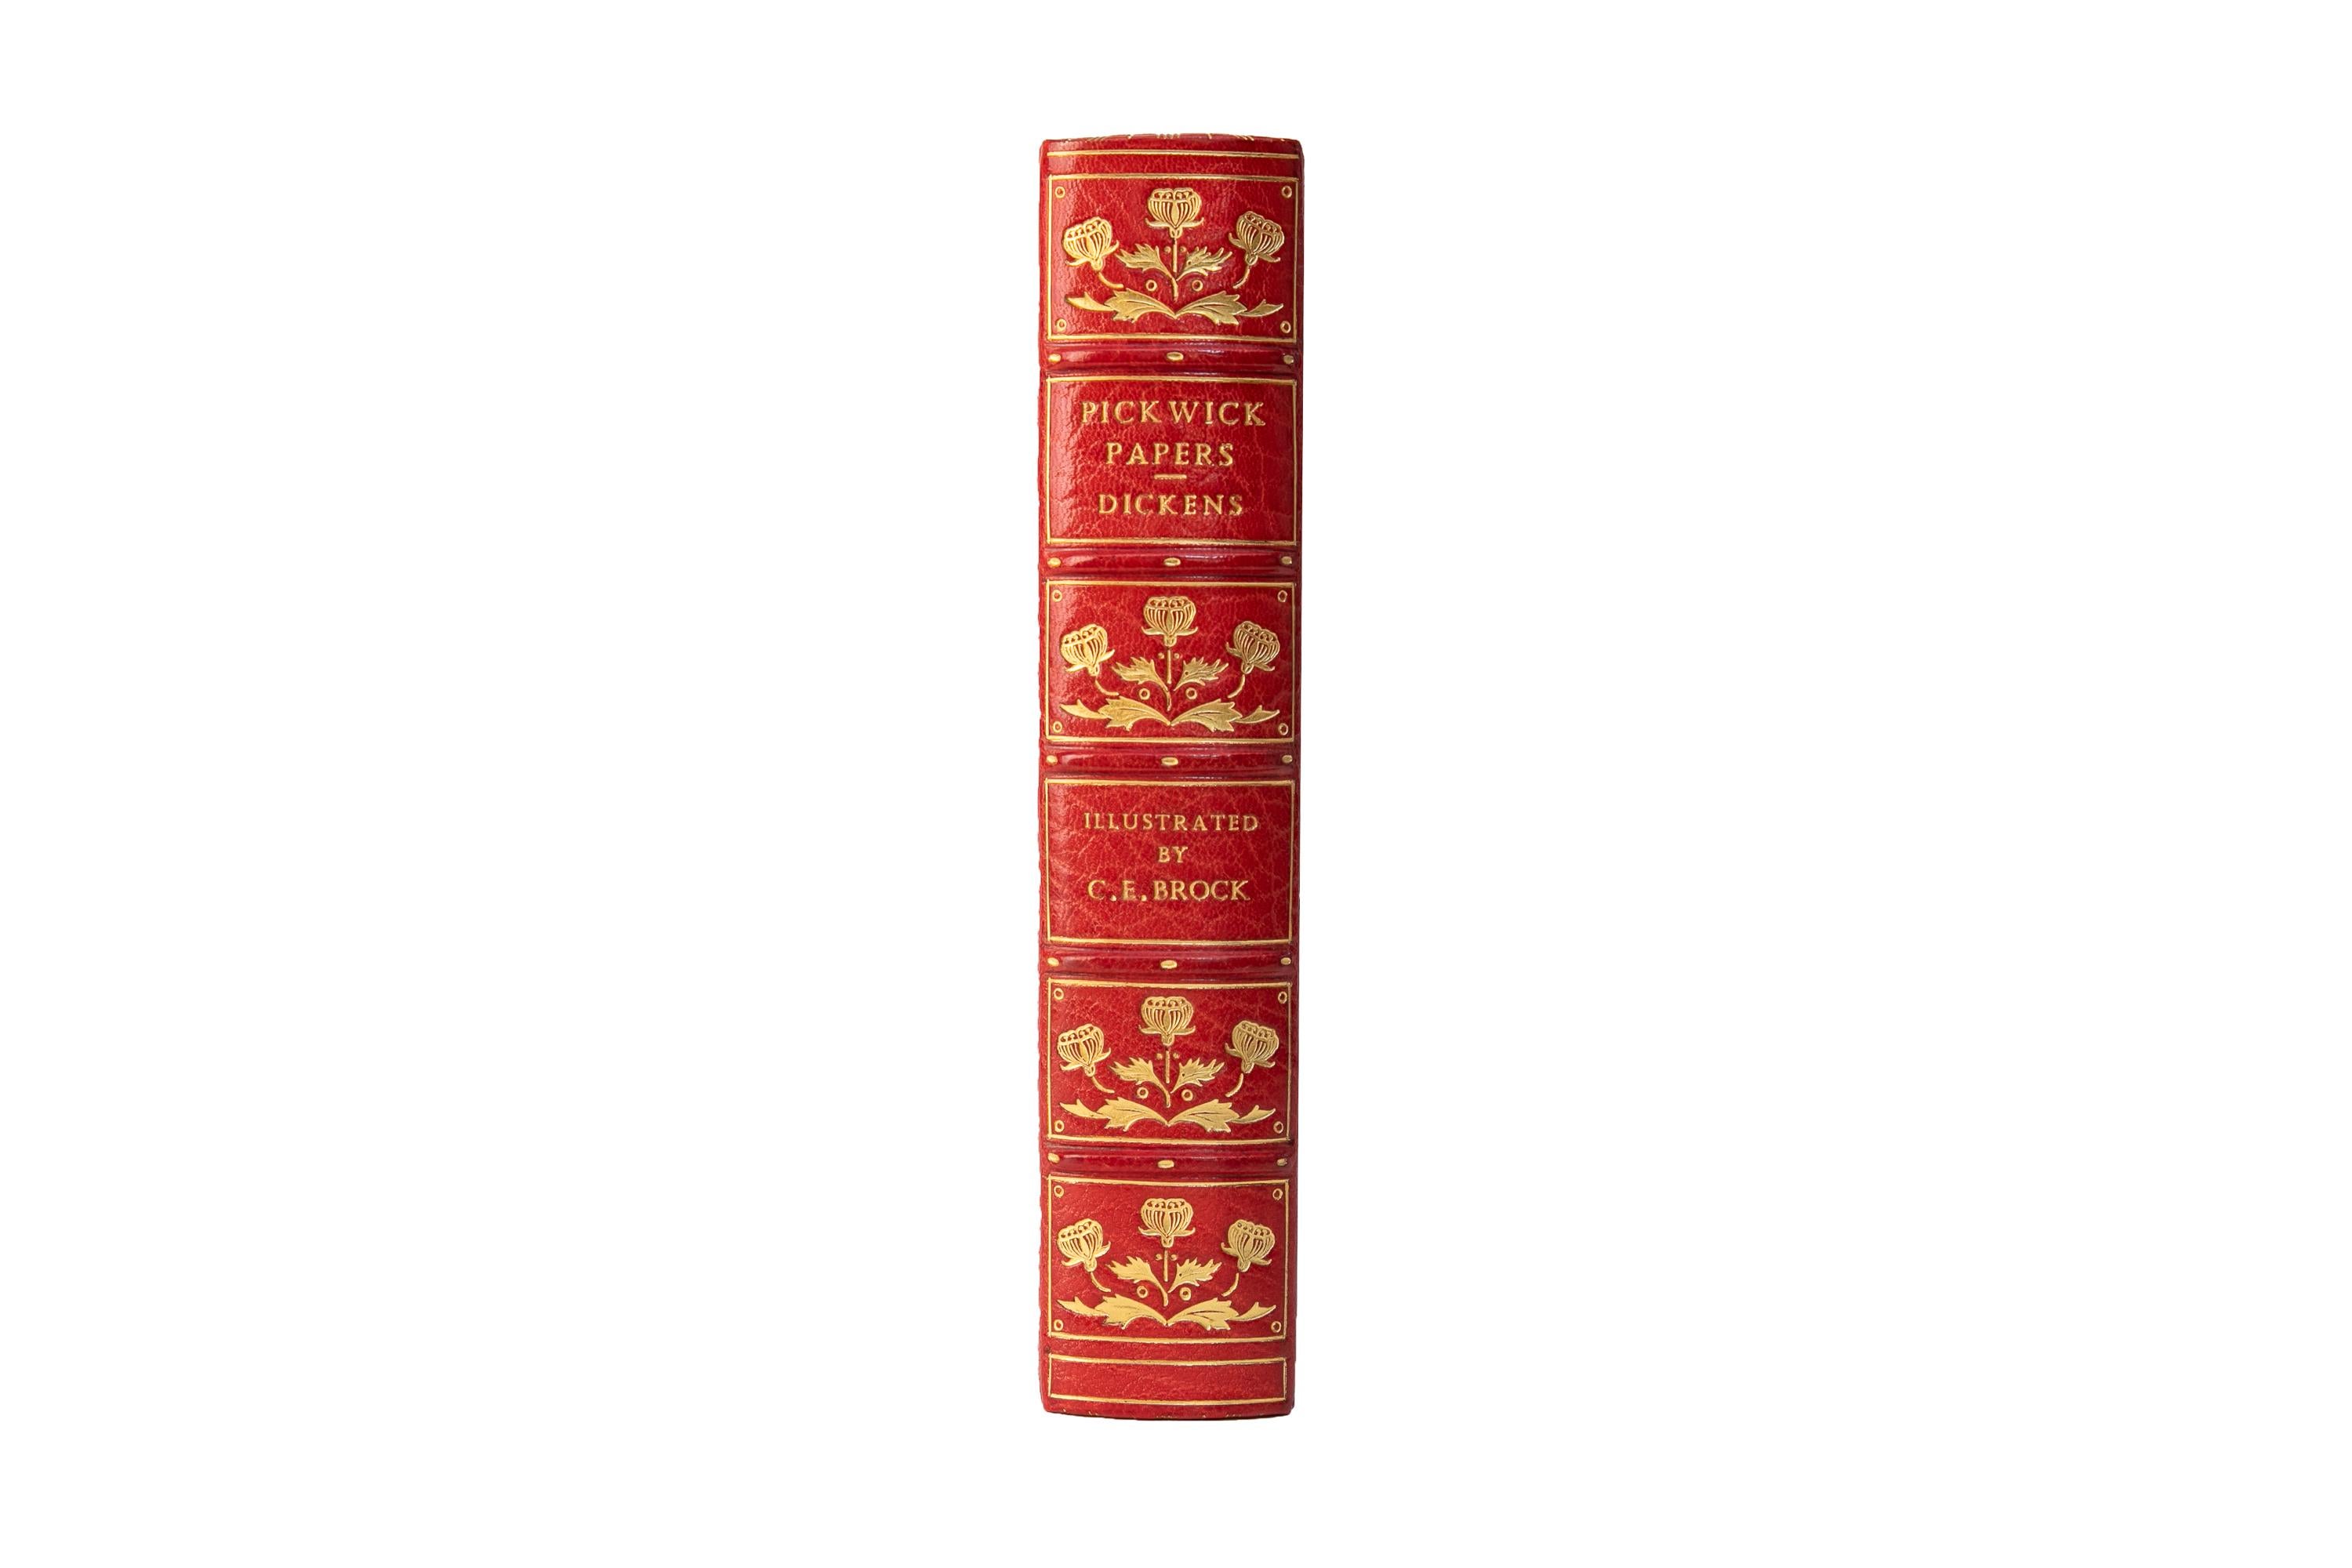 1 Volume. Charles Dickens, The Pickwick Papers. First Brock Edition. Bound by Bayntun in full red morocco with the covers displaying a multi-color inlay scene with 3 figures bordered in gilt-tooling. The Raised band spine displays gilt-tooled